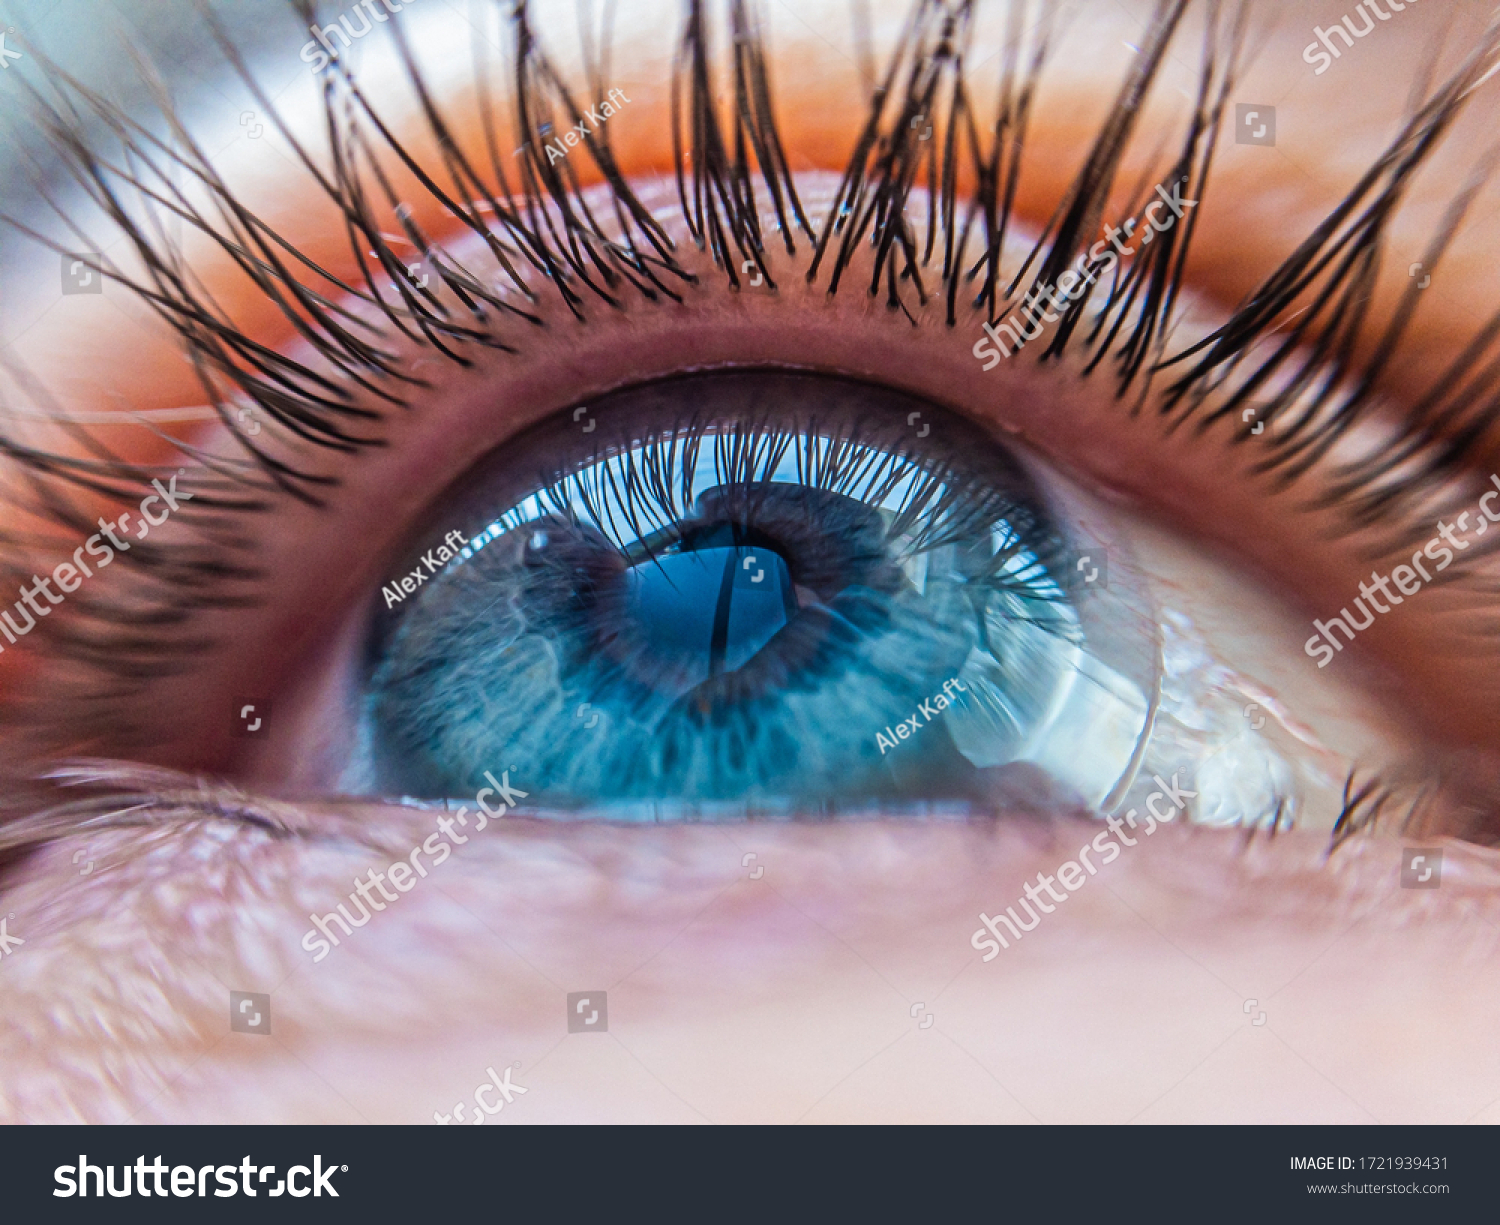 caucasian human blue eye in a contact lens looking up close up. contact lens vision medical correction concept #1721939431